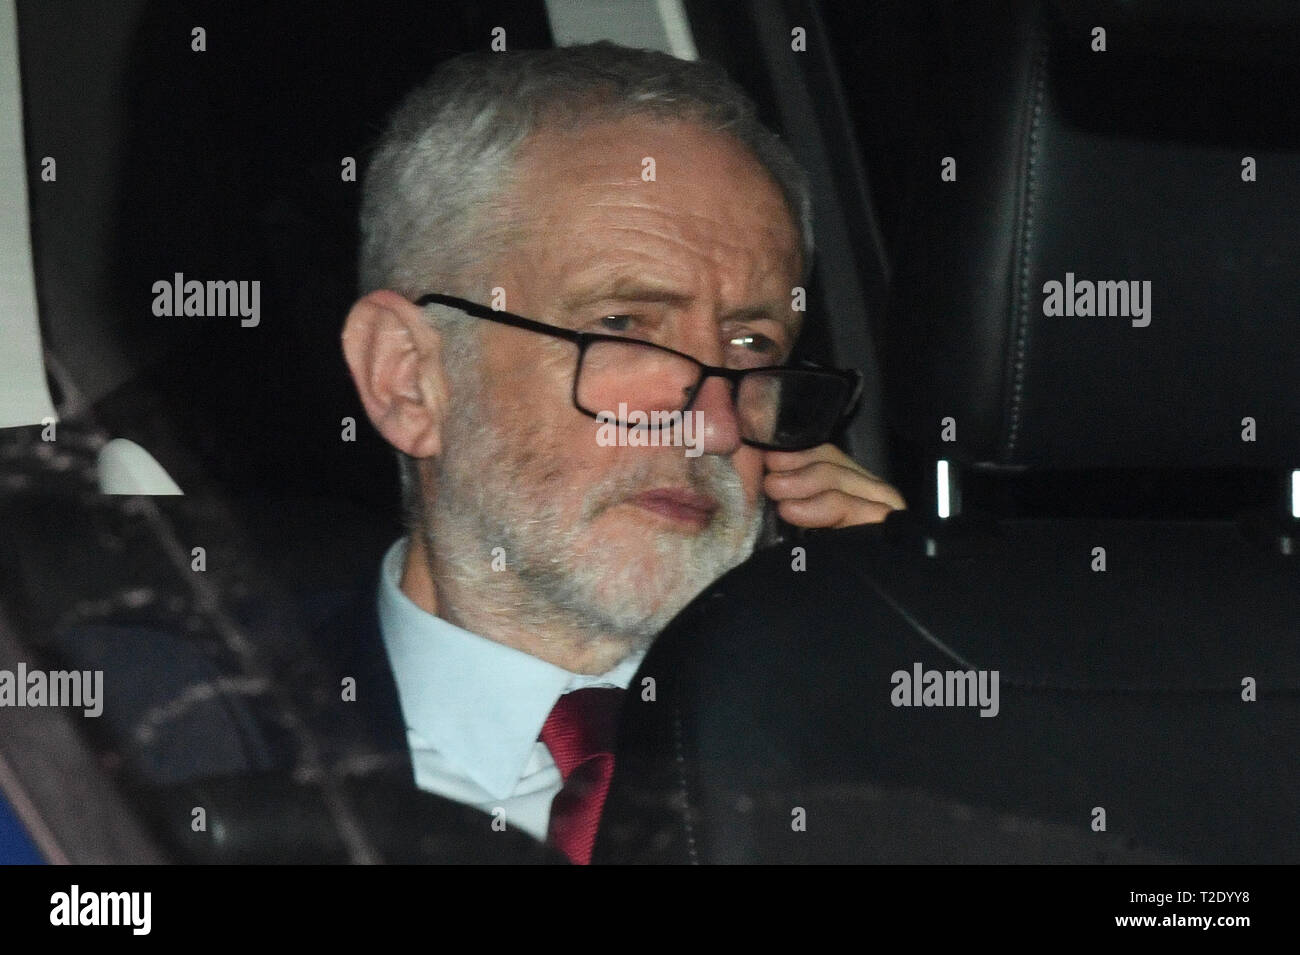 Labour leader Jeremy Corbyn leaving the House of Commons, London after MPs fail to back proposals on alternatives to Theresa May's EU withdrawal deal. Stock Photo